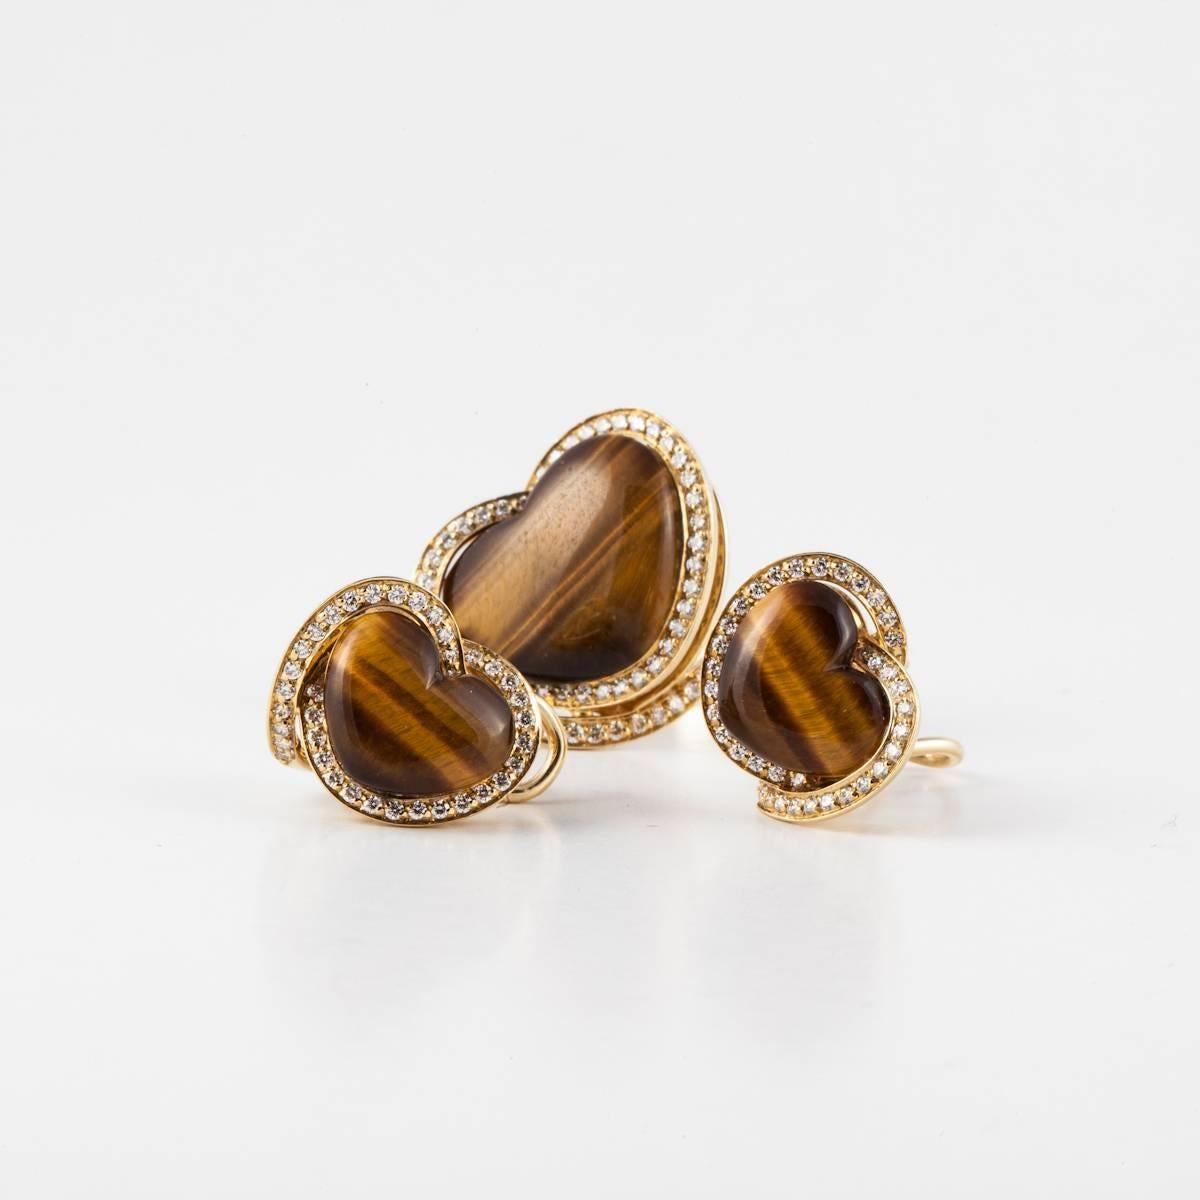 Estate Roberto Coin set of earrings and a ring composed of 18K yellow gold and tiger's eye.   The set features heart-shaped tiger's eye framed by round diamonds.  The earrings are omega backs and measure 5/8 inches across.  The ring's presentation